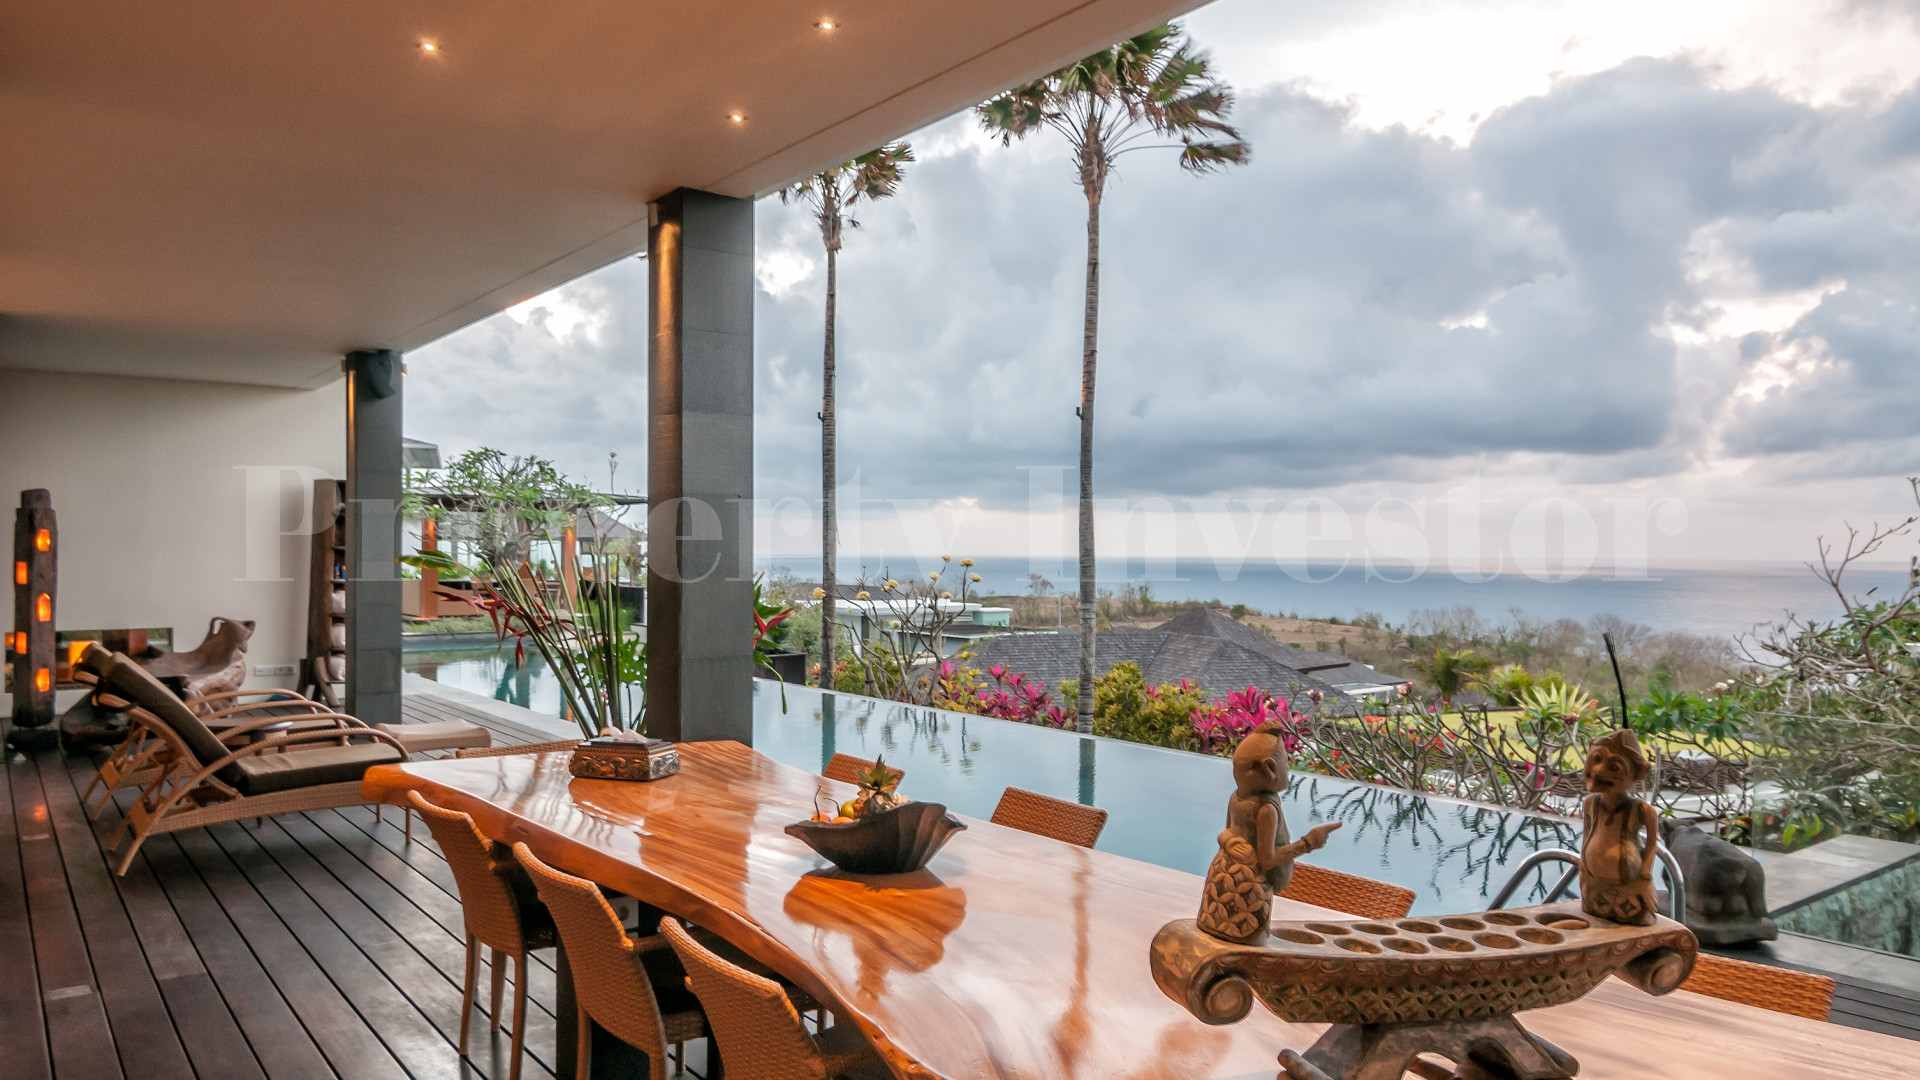 Stunning 7 Bedroom Luxury Villa with 180° Degree Panoramic Ocean Views for Sale in Pandawa, Bali